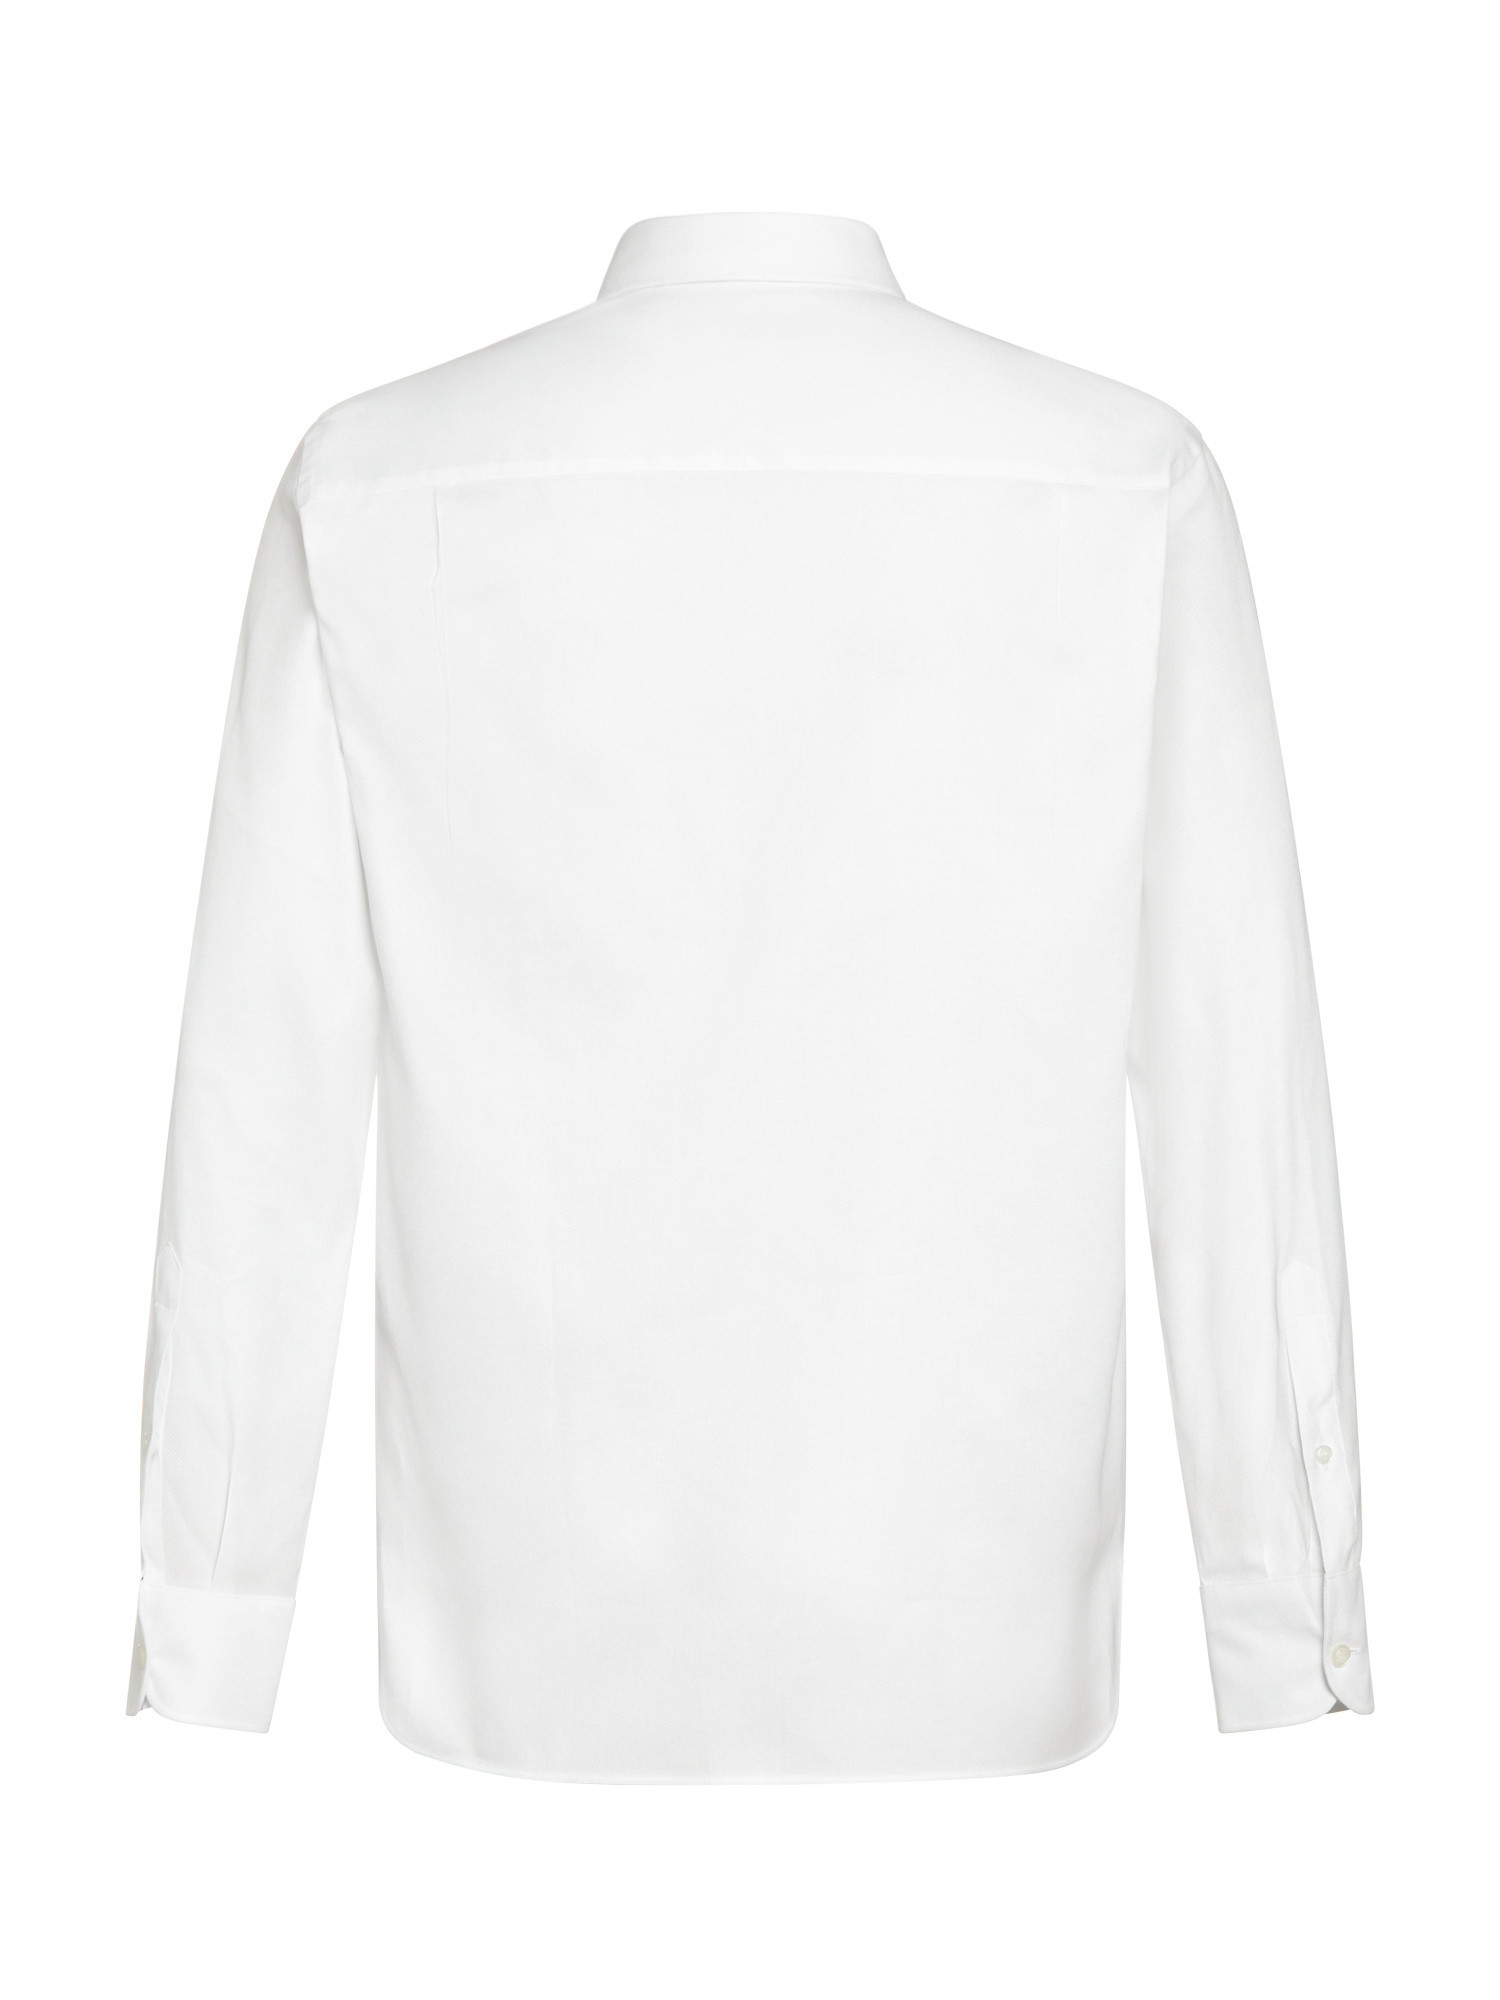 Luca D'Altieri - Regular fit shirt in fine cotton oxford, White, large image number 2